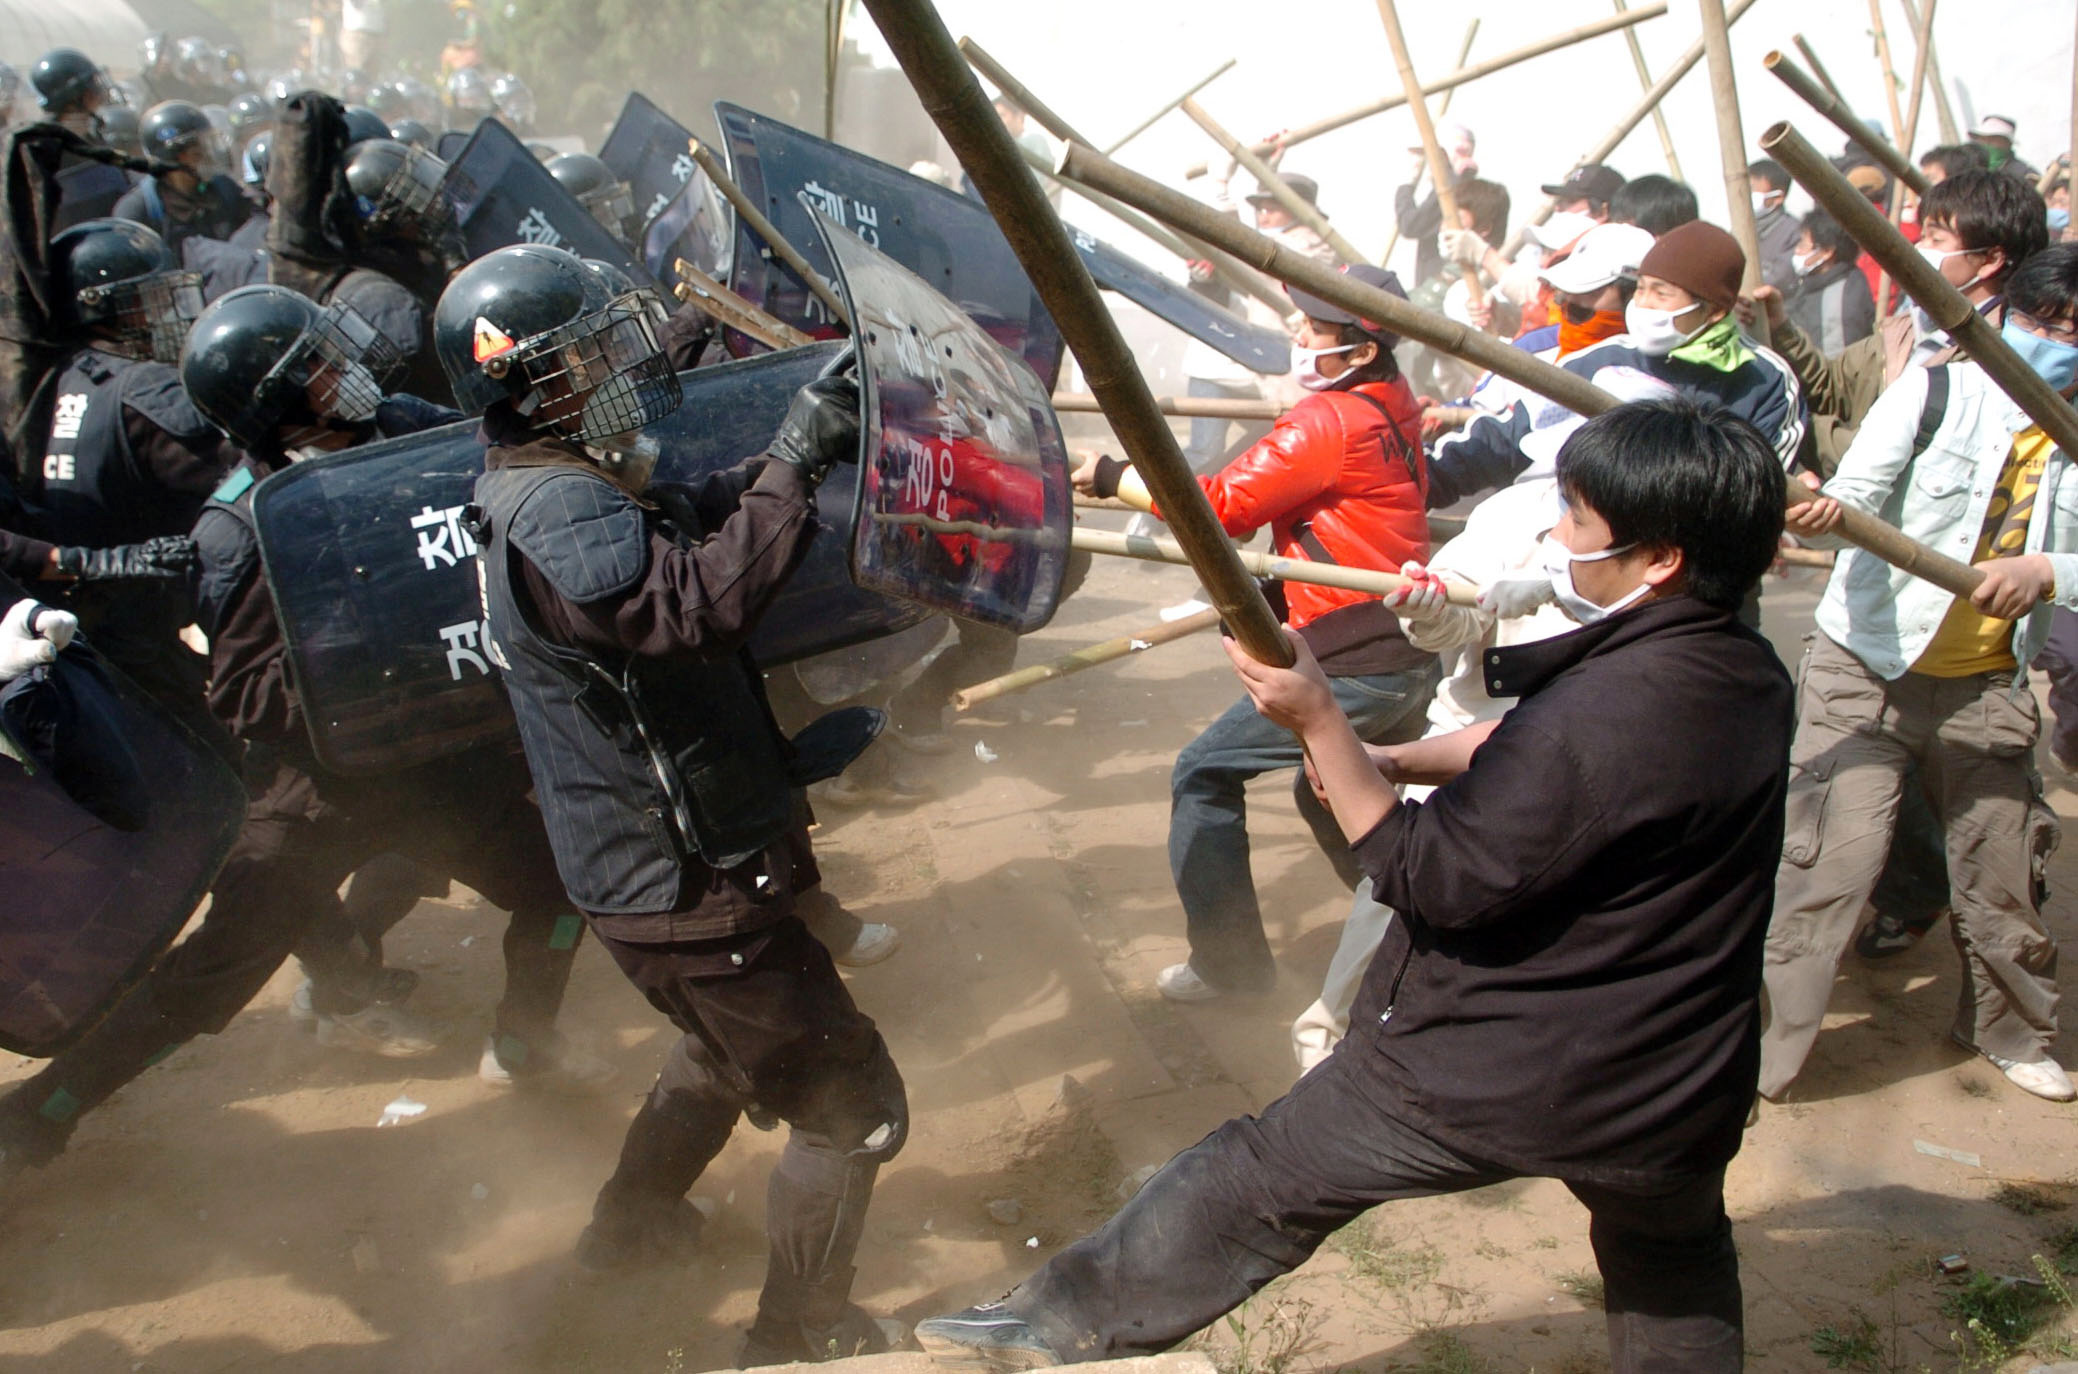 South Korean riot police use force to break up a protest in